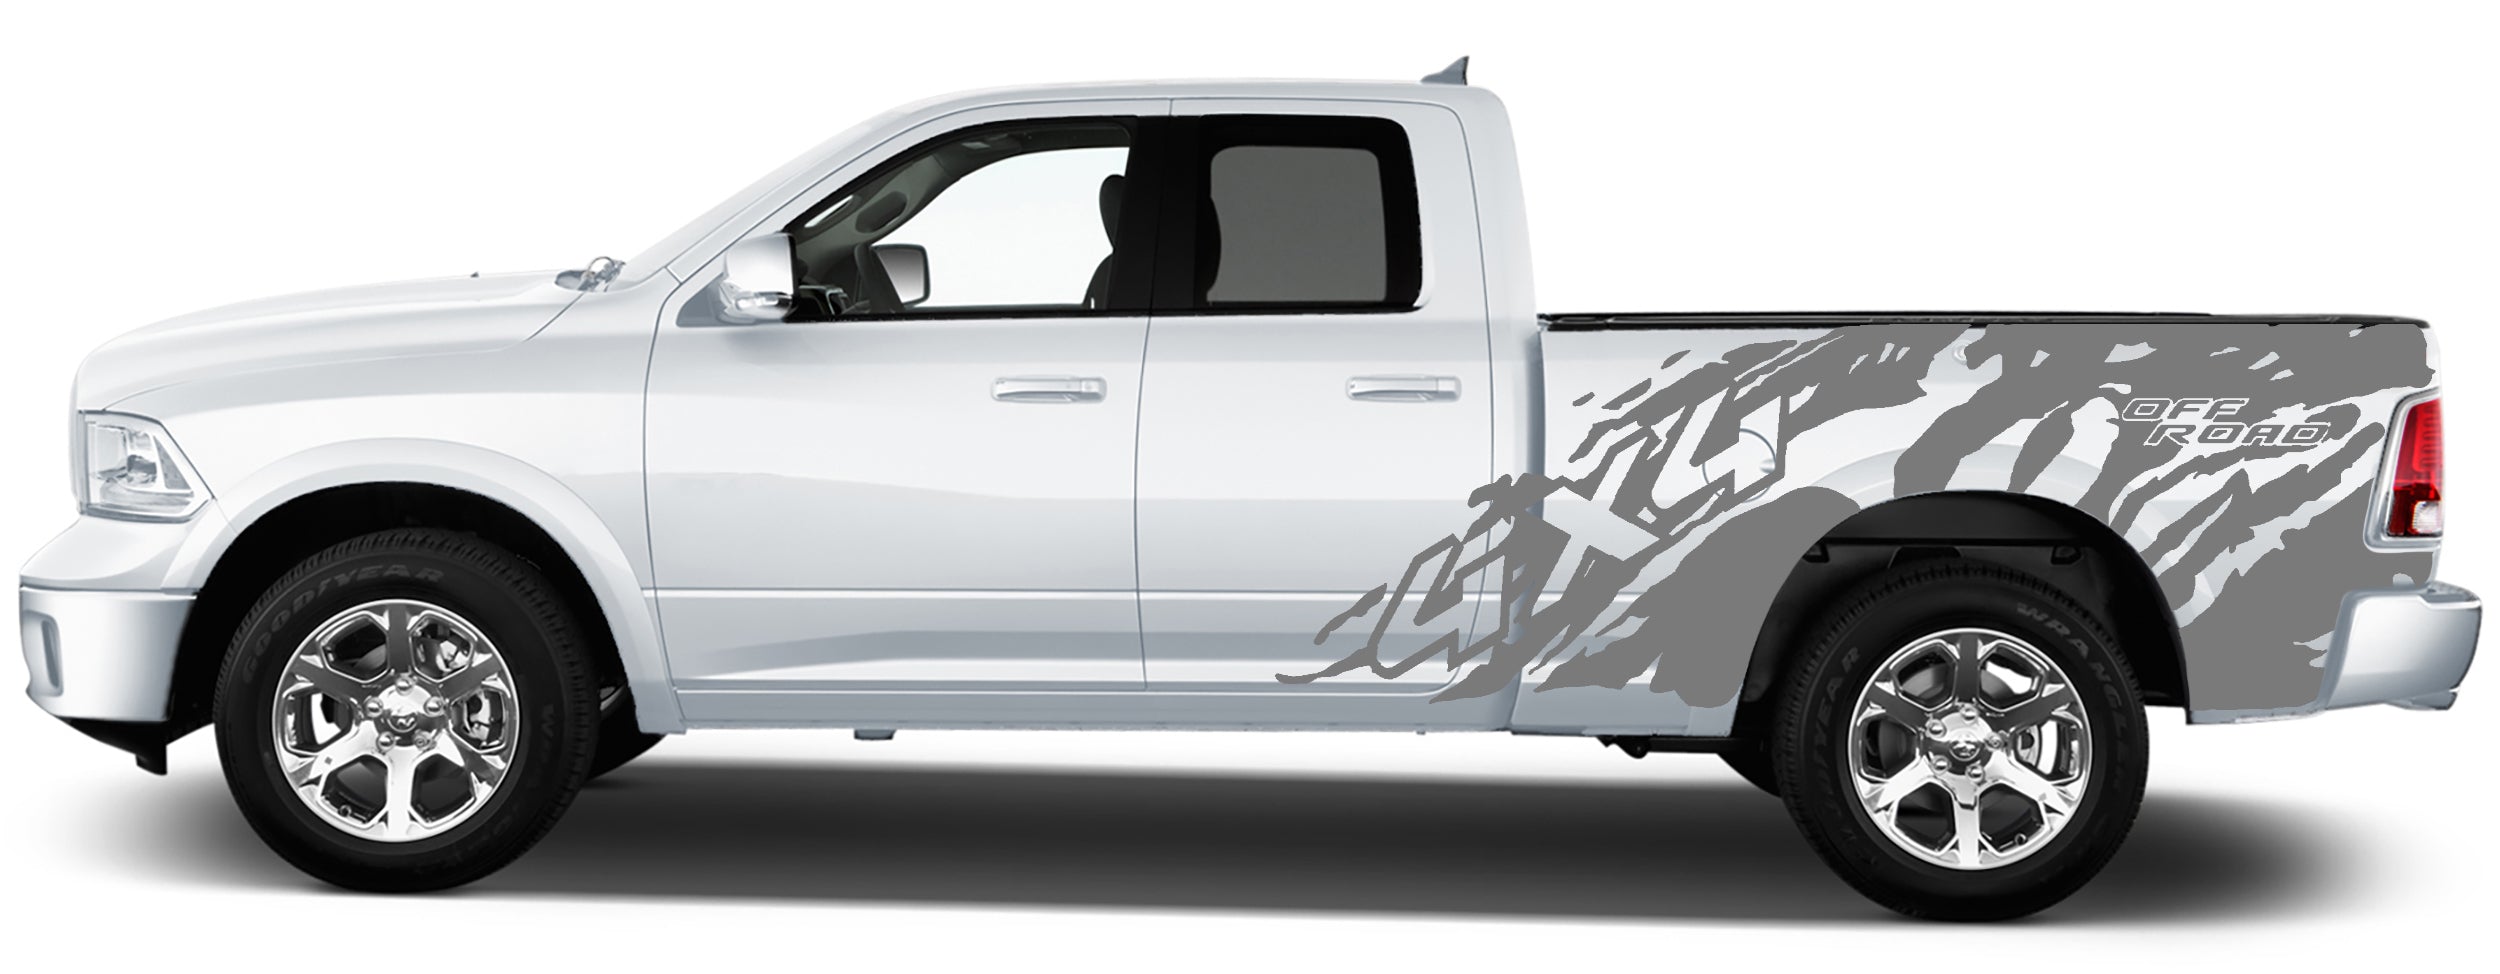 4x4 off road side graphics for dodge ram 2009 to 2018 models gray